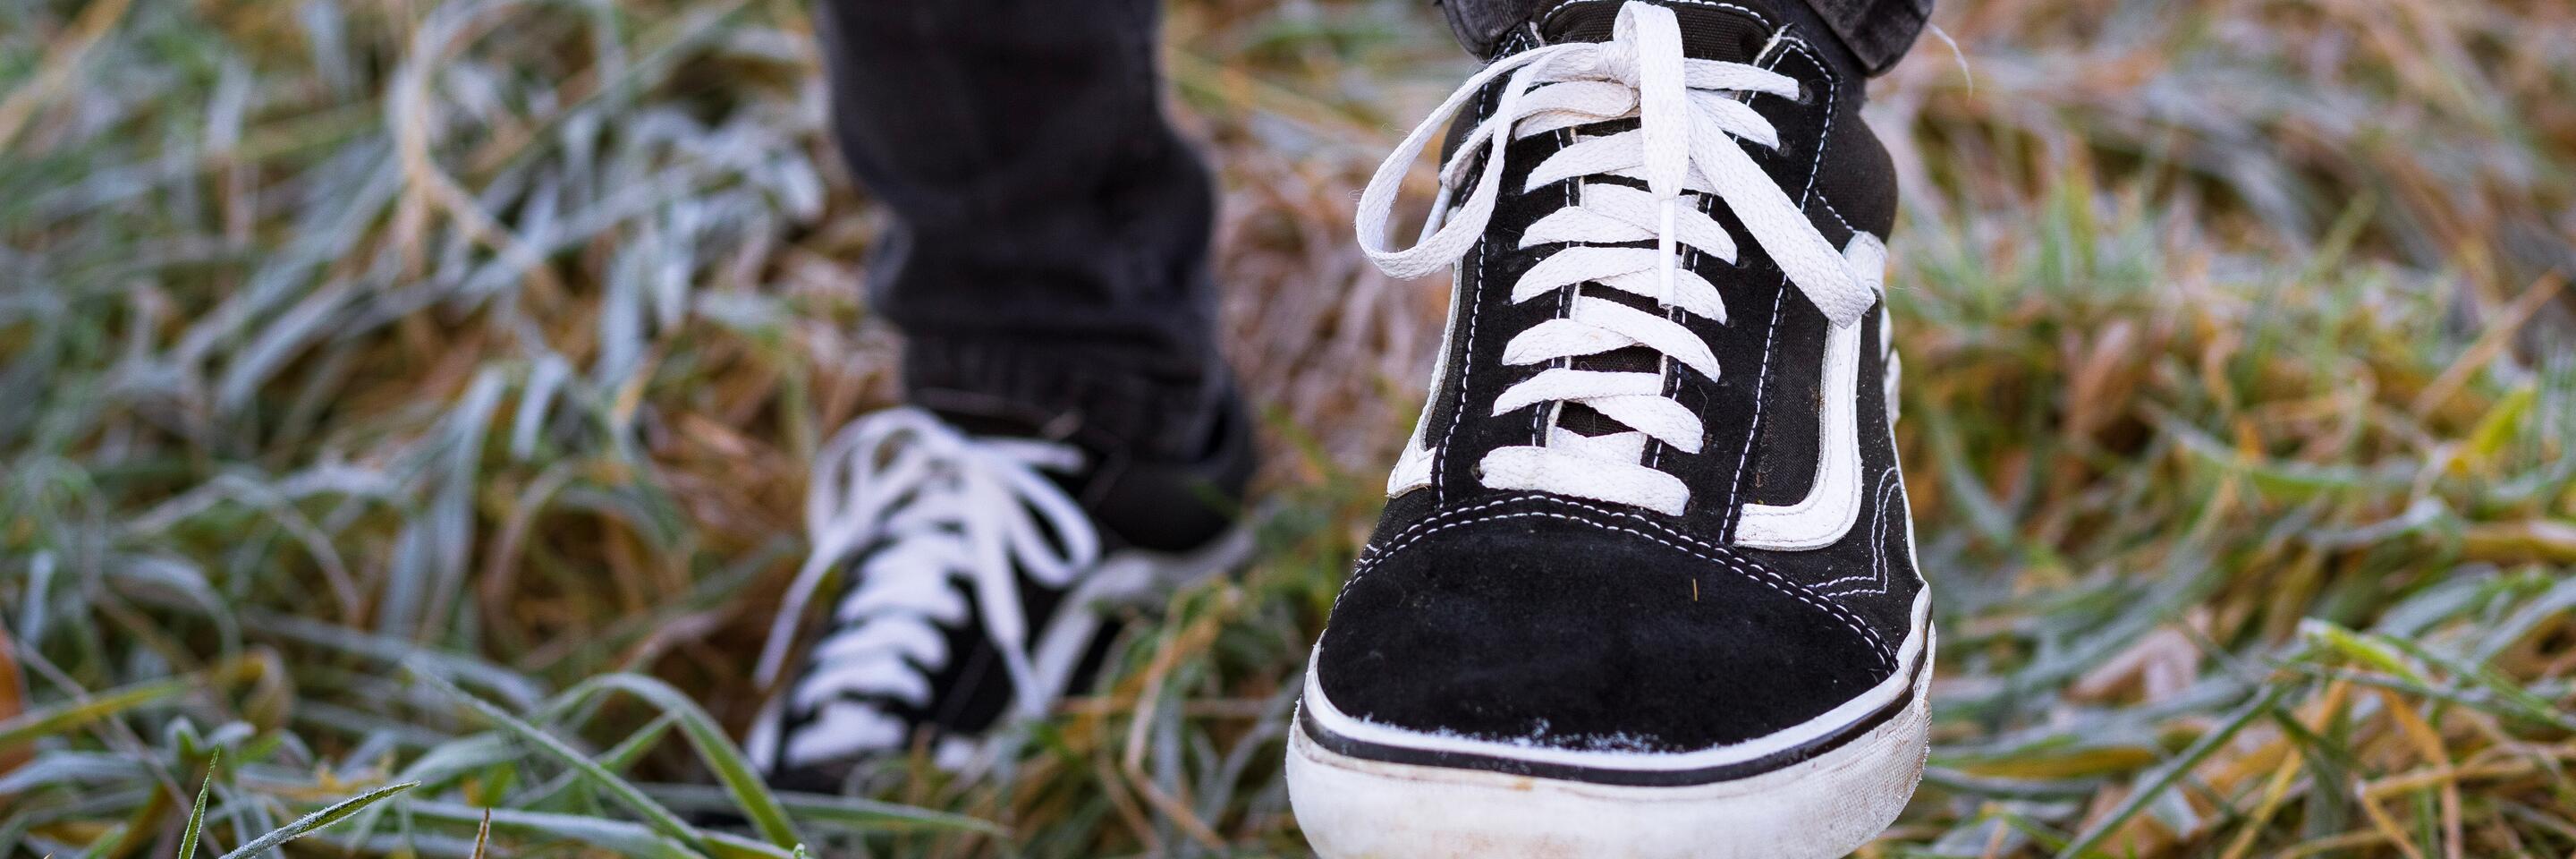 Developing an end-of-life strategy for footwear | MIT Sloan